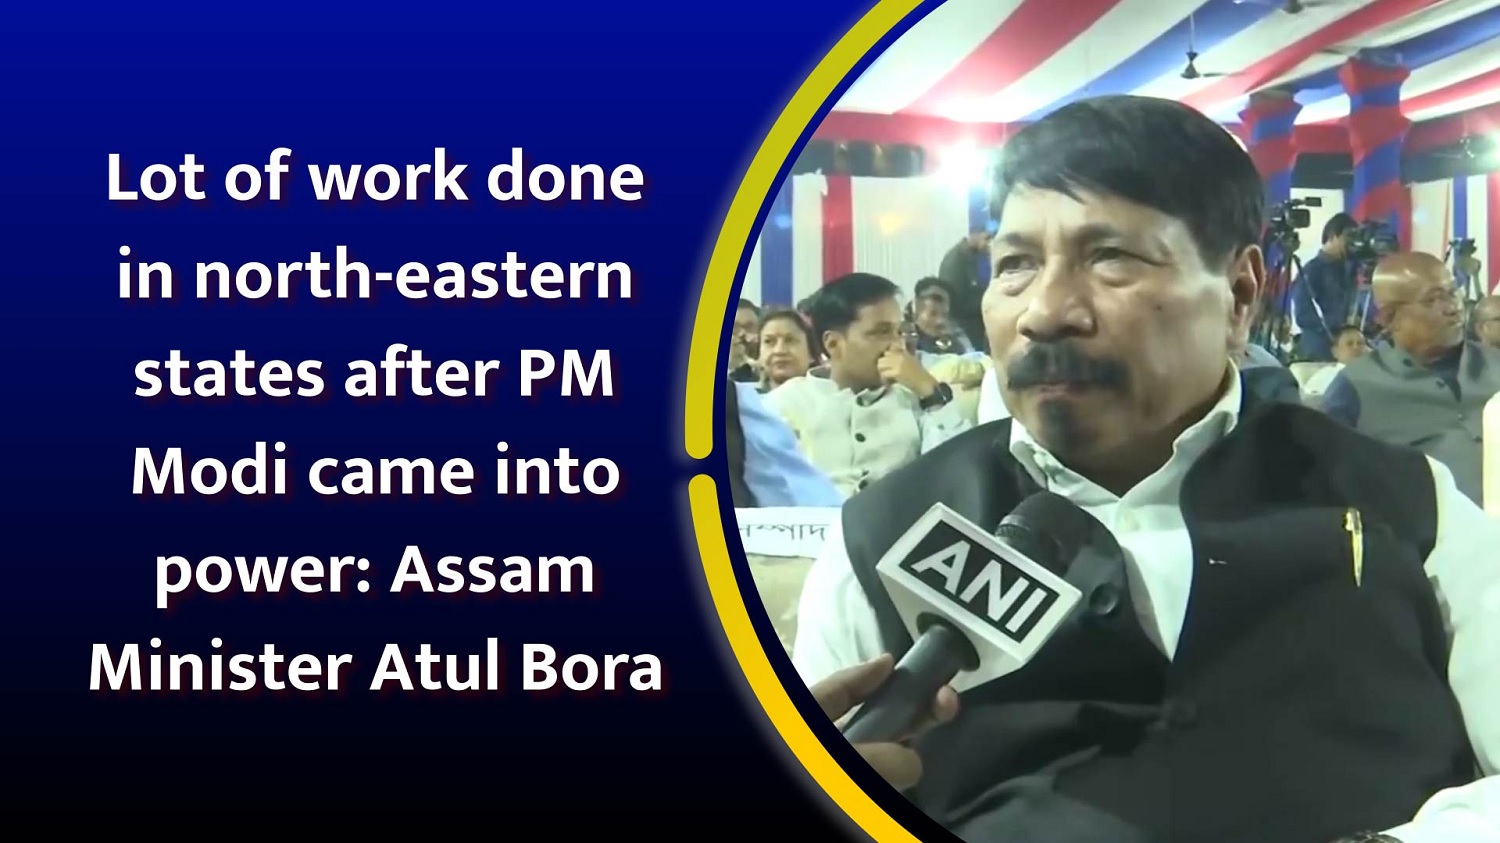 Lot of work done in north-eastern states after PM Narendra Modi came into power Assam Minister Atul Bora